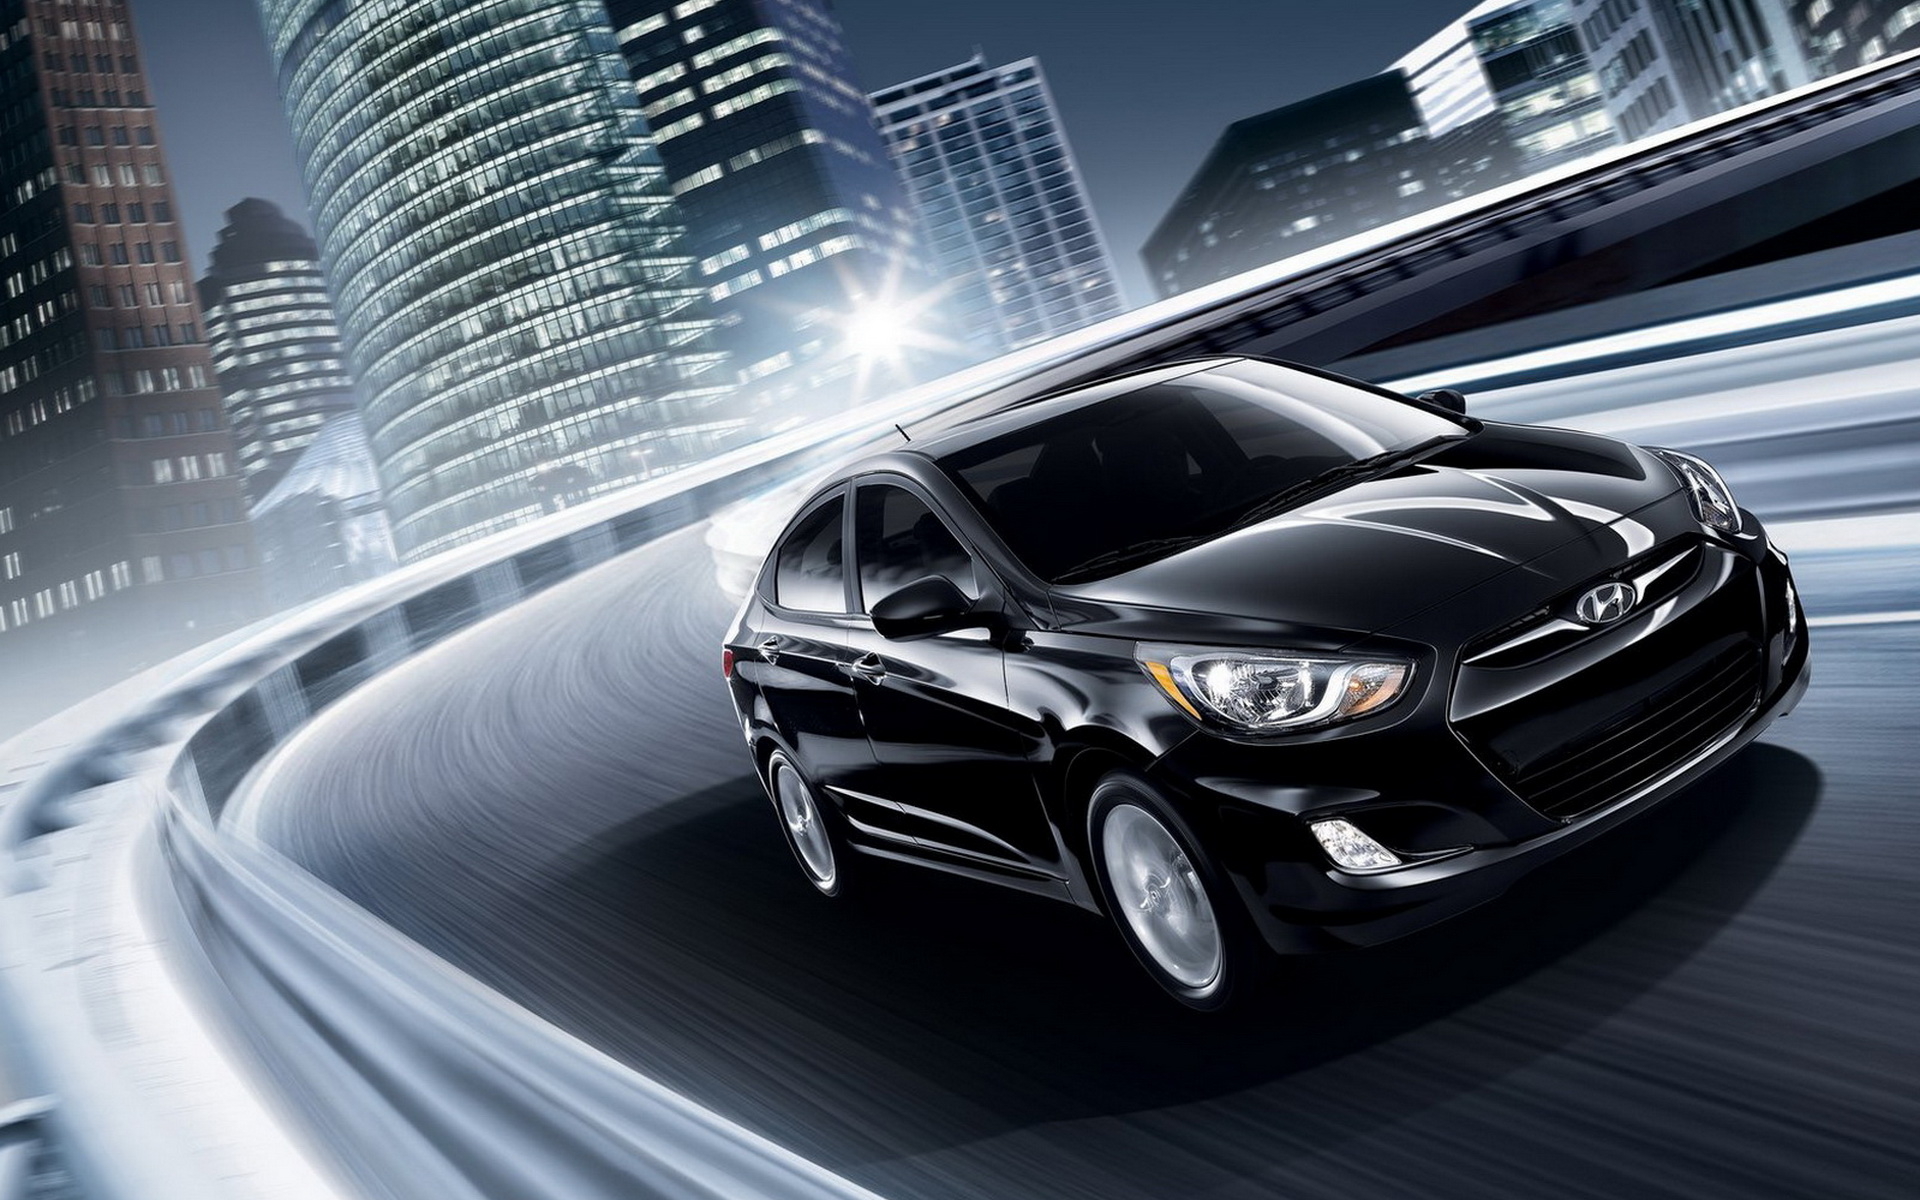 Hyundai-Accent 2012 wallpapers and images - wallpapers ...